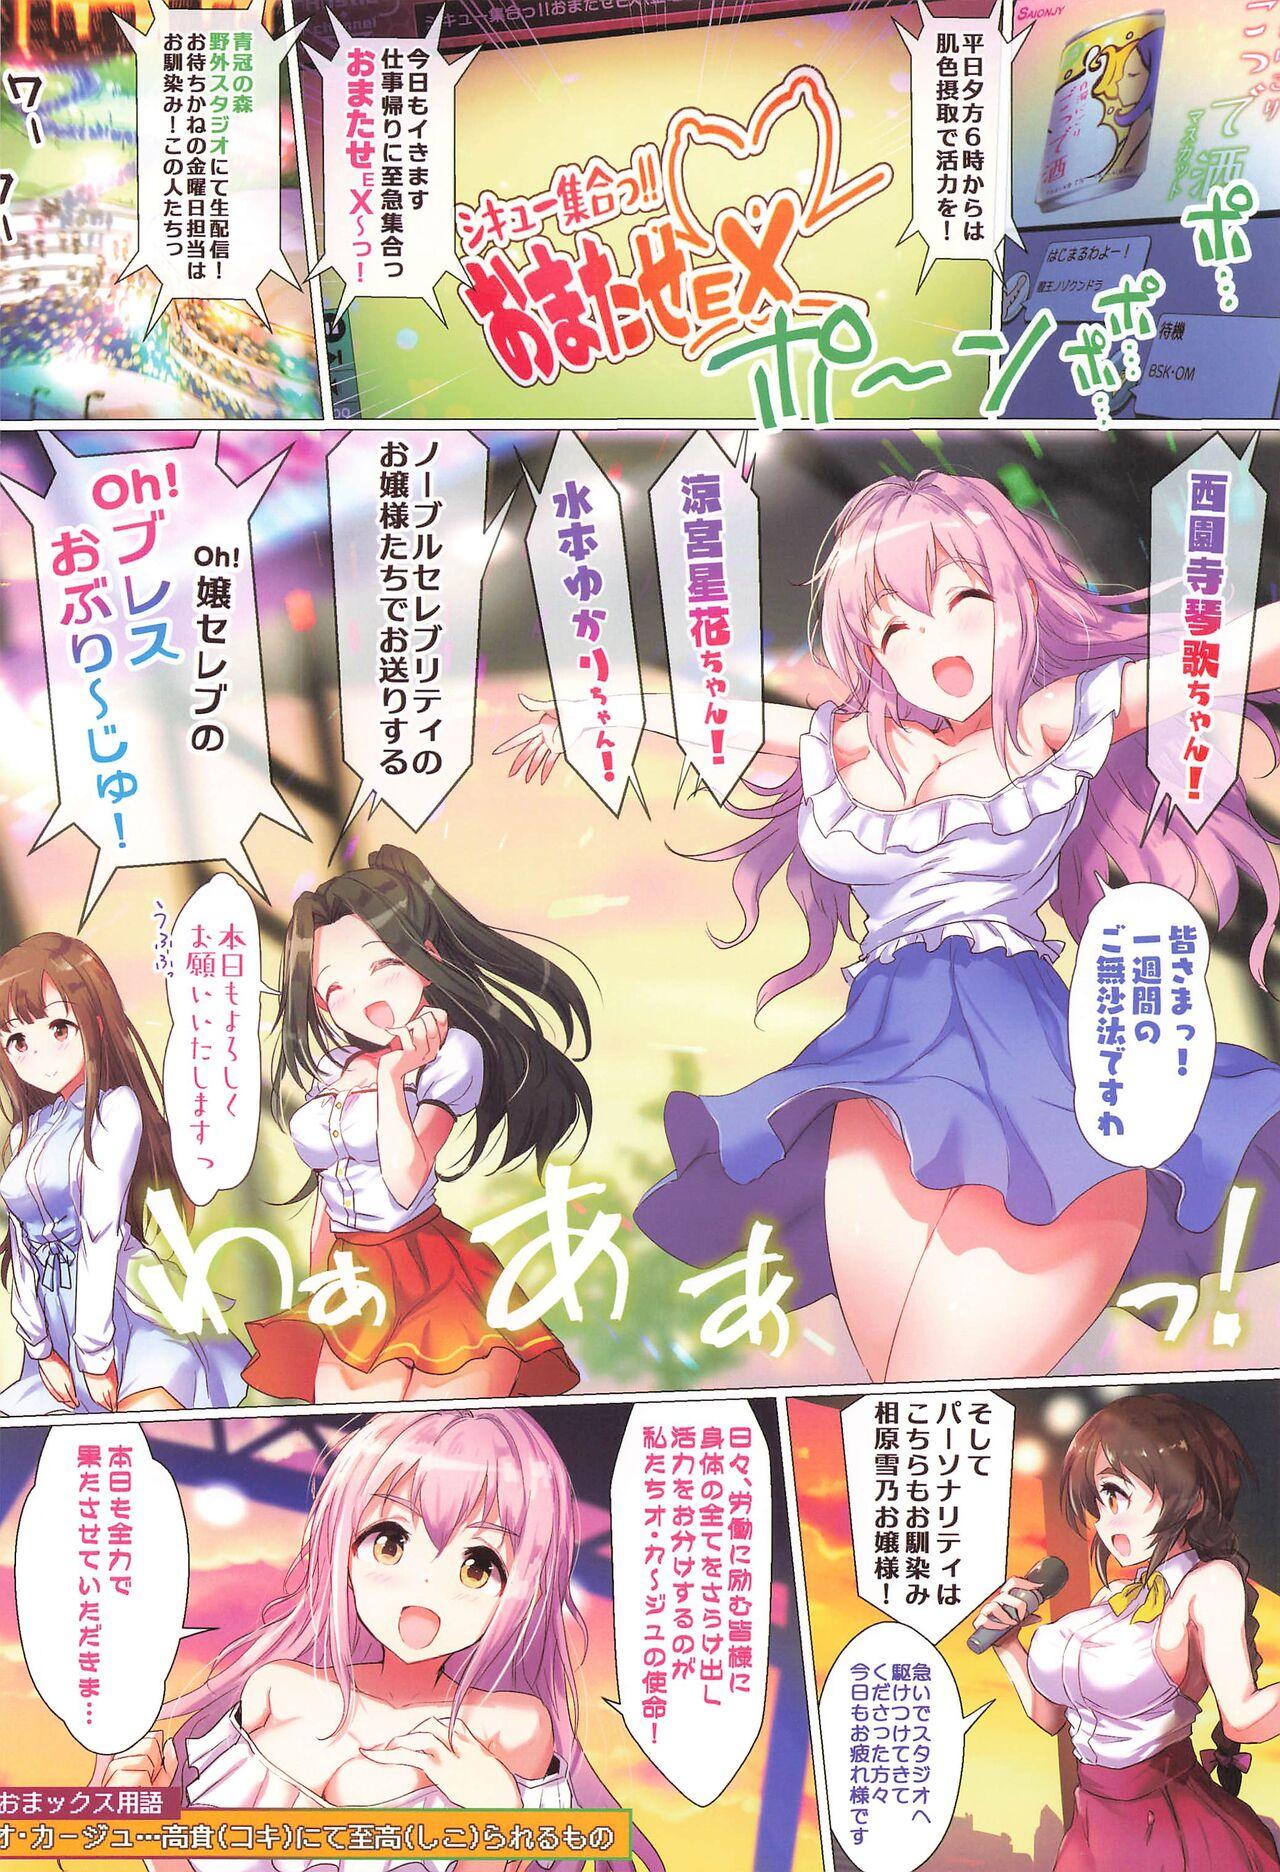 Maid Oh! Jou Celeb no Oh! Blesse Oblige - The idolmaster Black Cock - Page 2